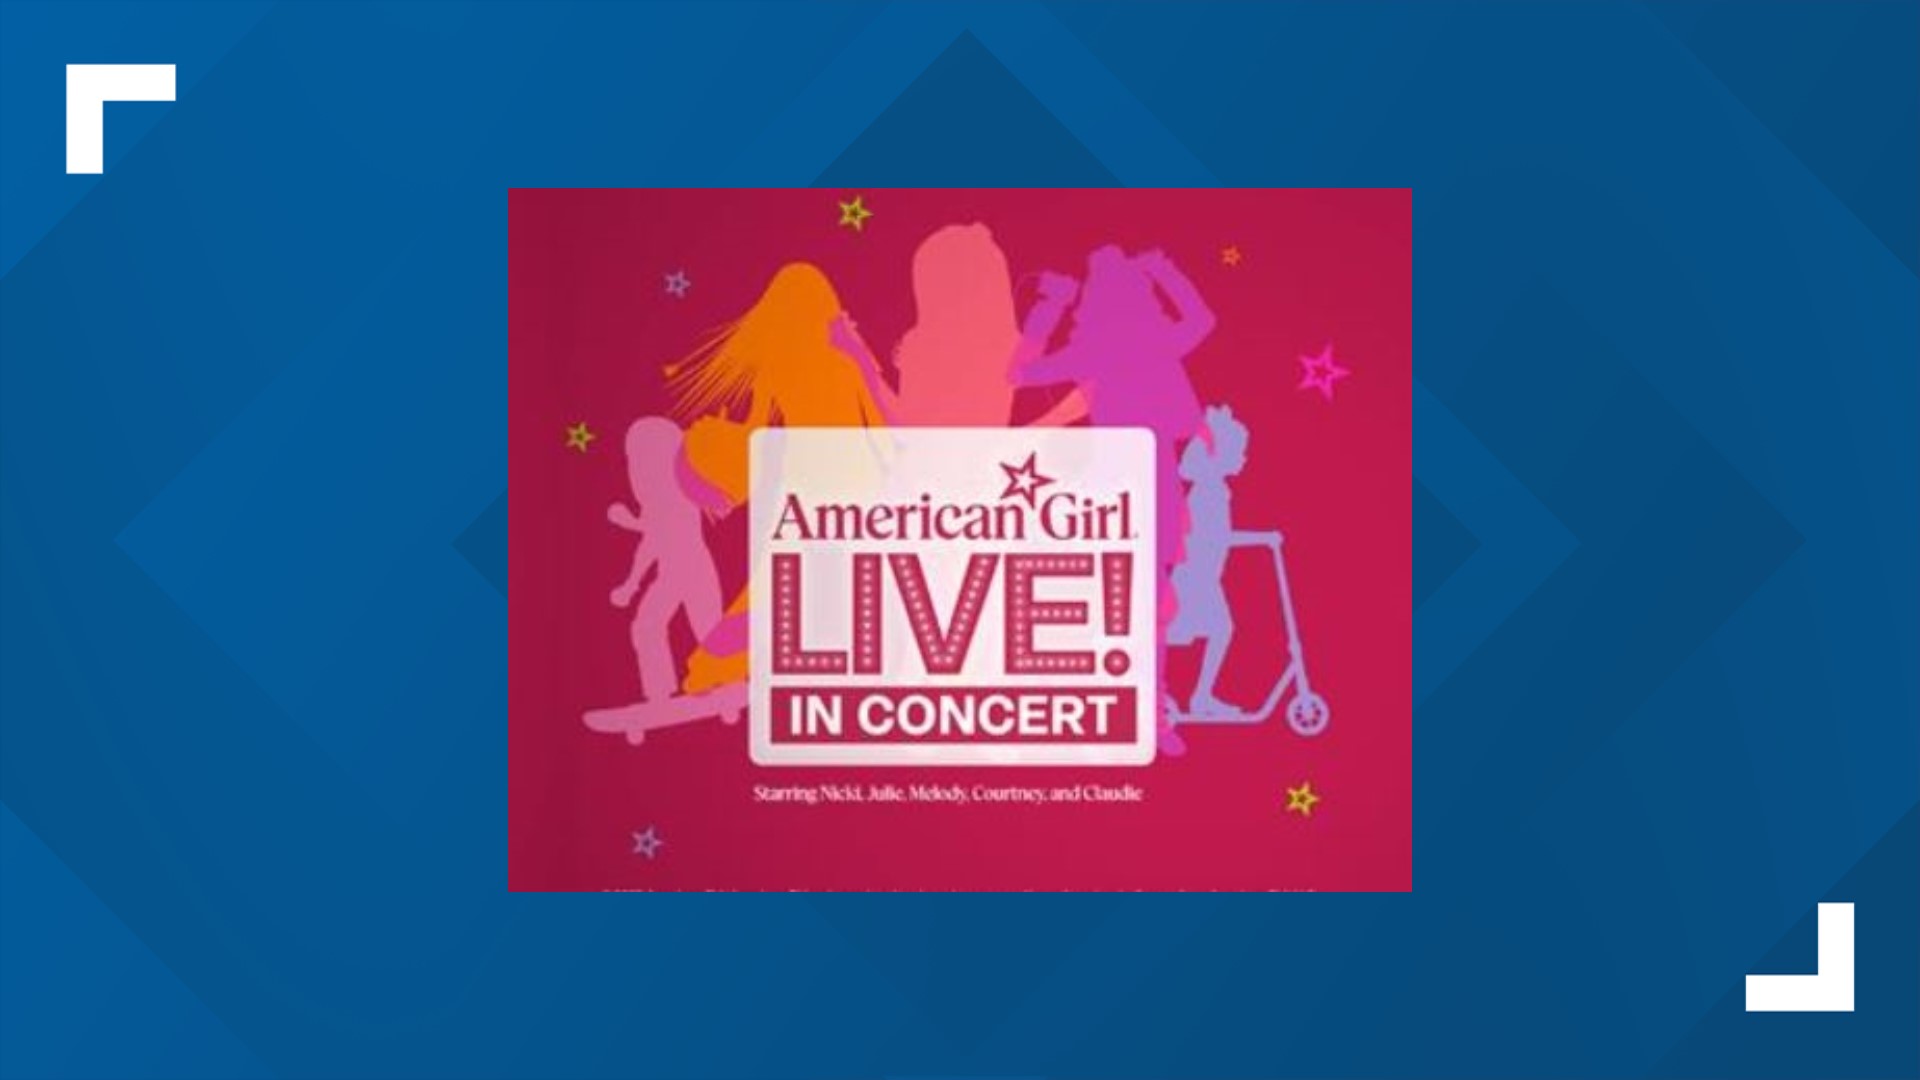 'American Girl Live! In Concert' will visit York's Pullo Center on Oct